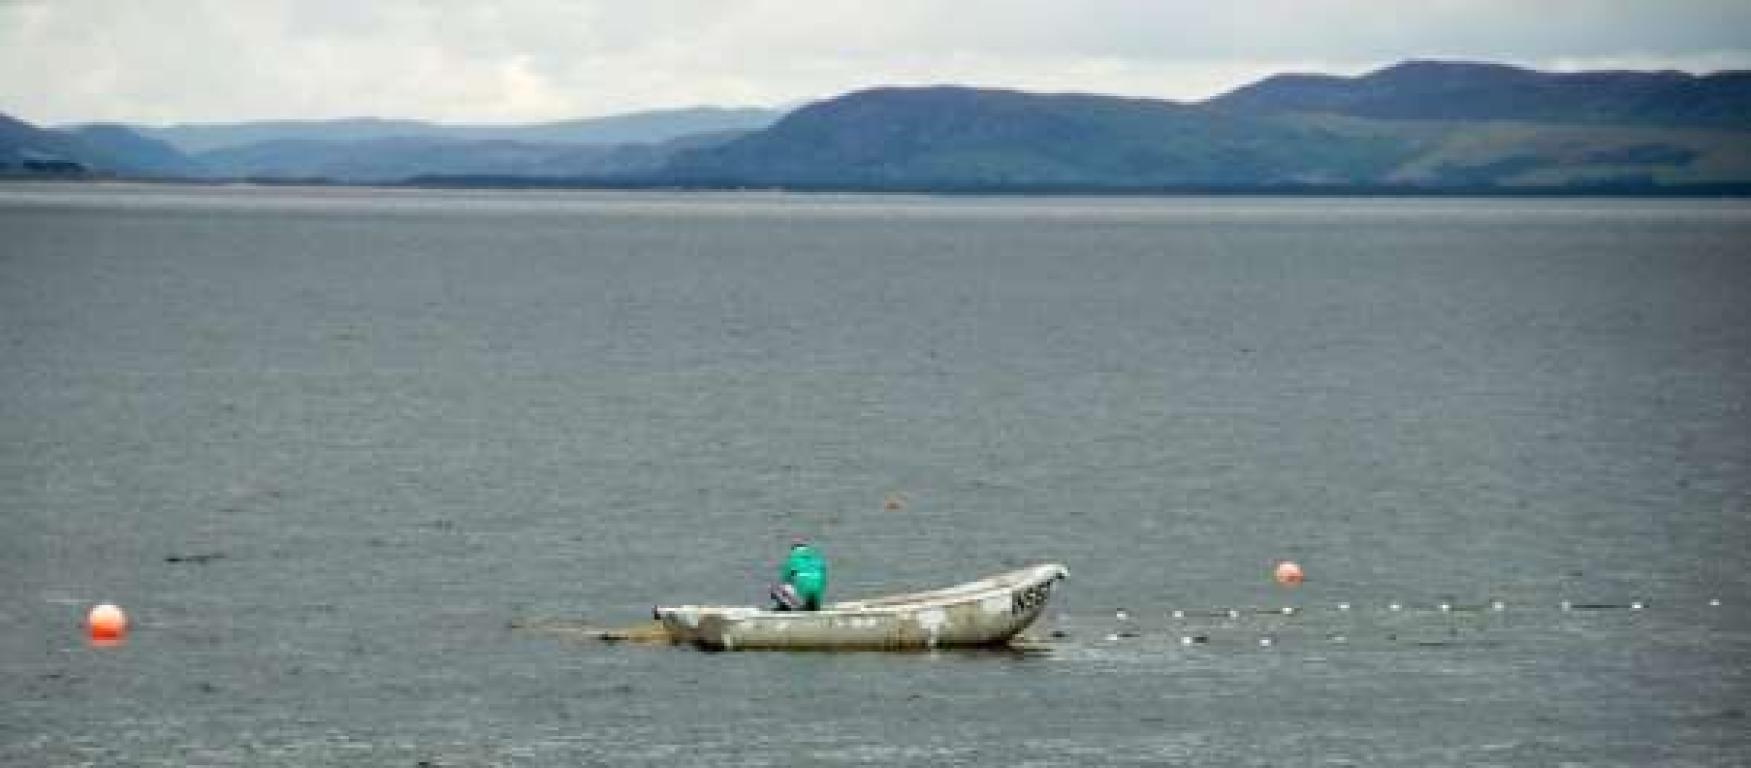 A small boat, a coble, with a man in a green jacket is seen sailing off Portmahomack. The man appears to be checking a net.